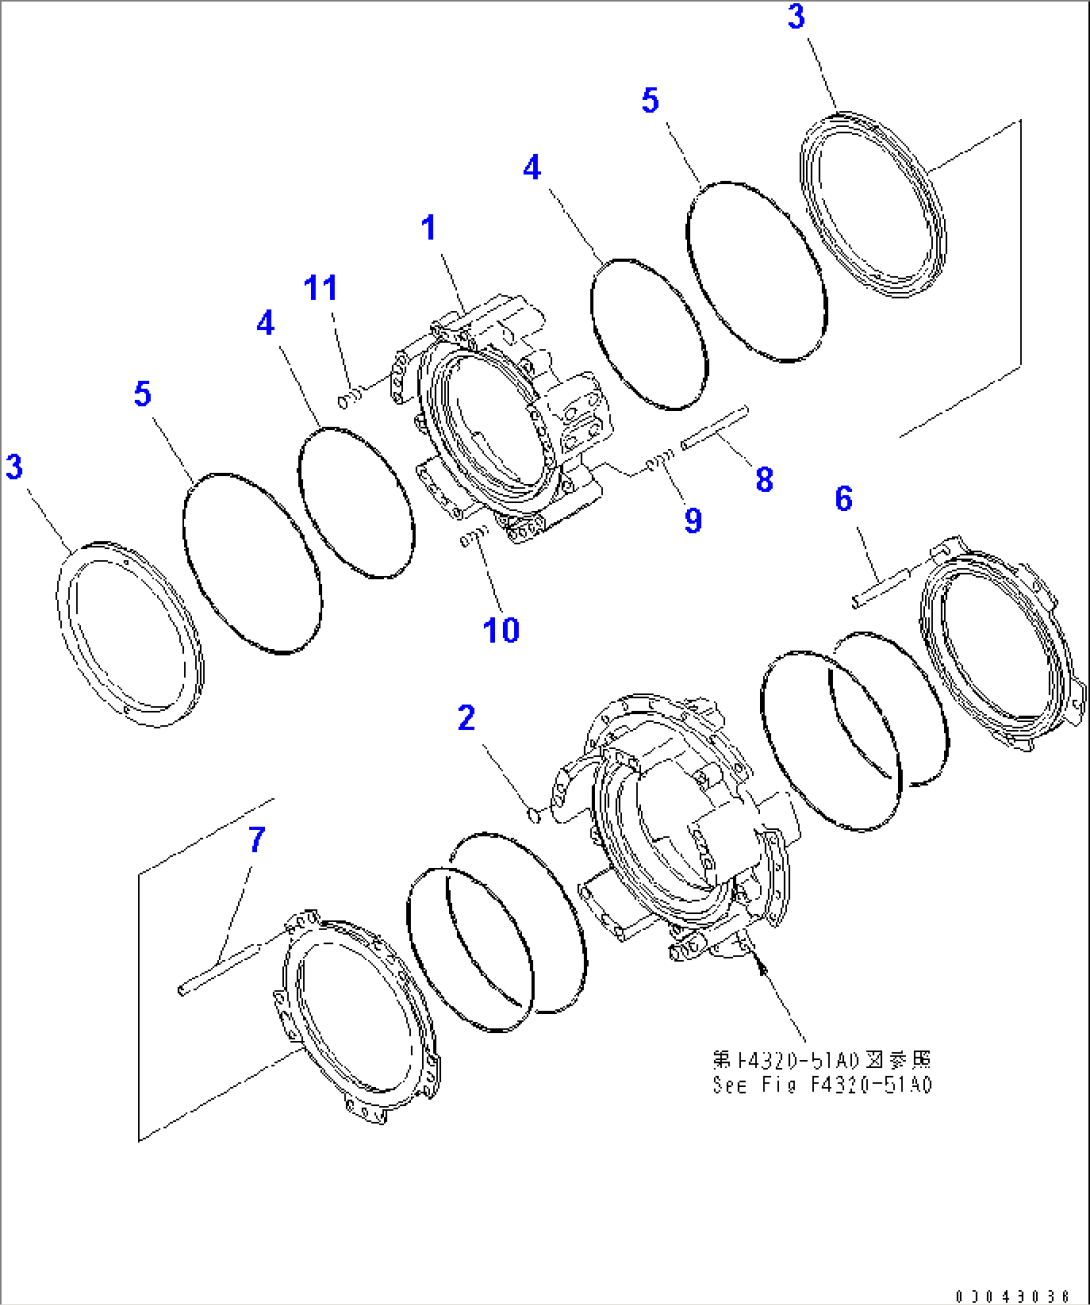 TRANSMISSION (4TH AND 3RD HOUSING)(#55001-)